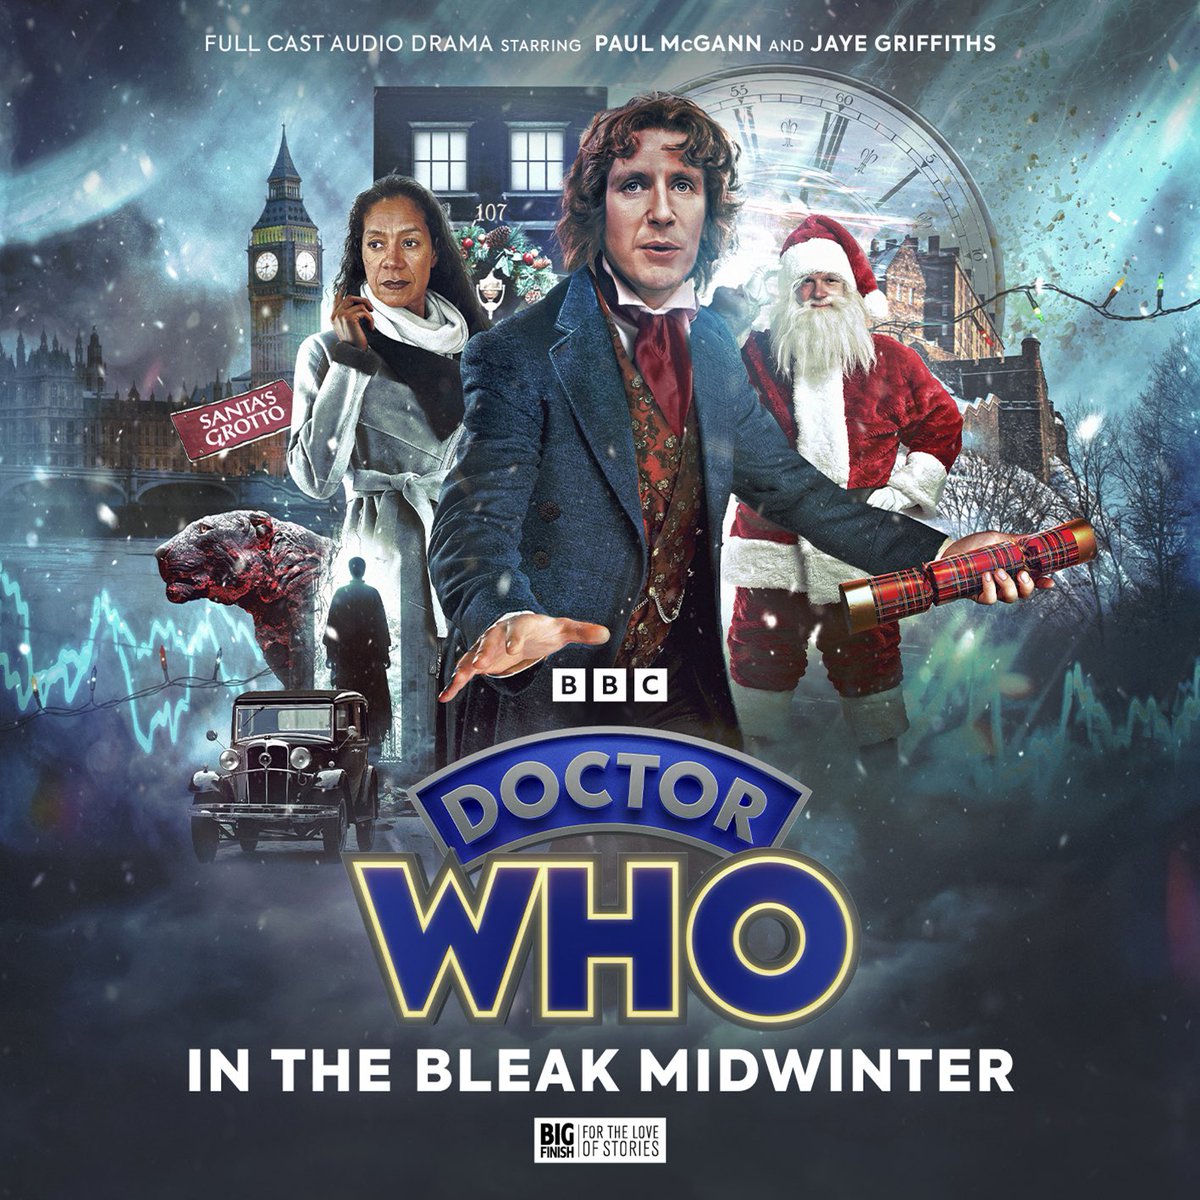 I always love it when @bigfinish do dummy covers for their #DoctorWho audios. And the best thing to do is to keep copies as backups.